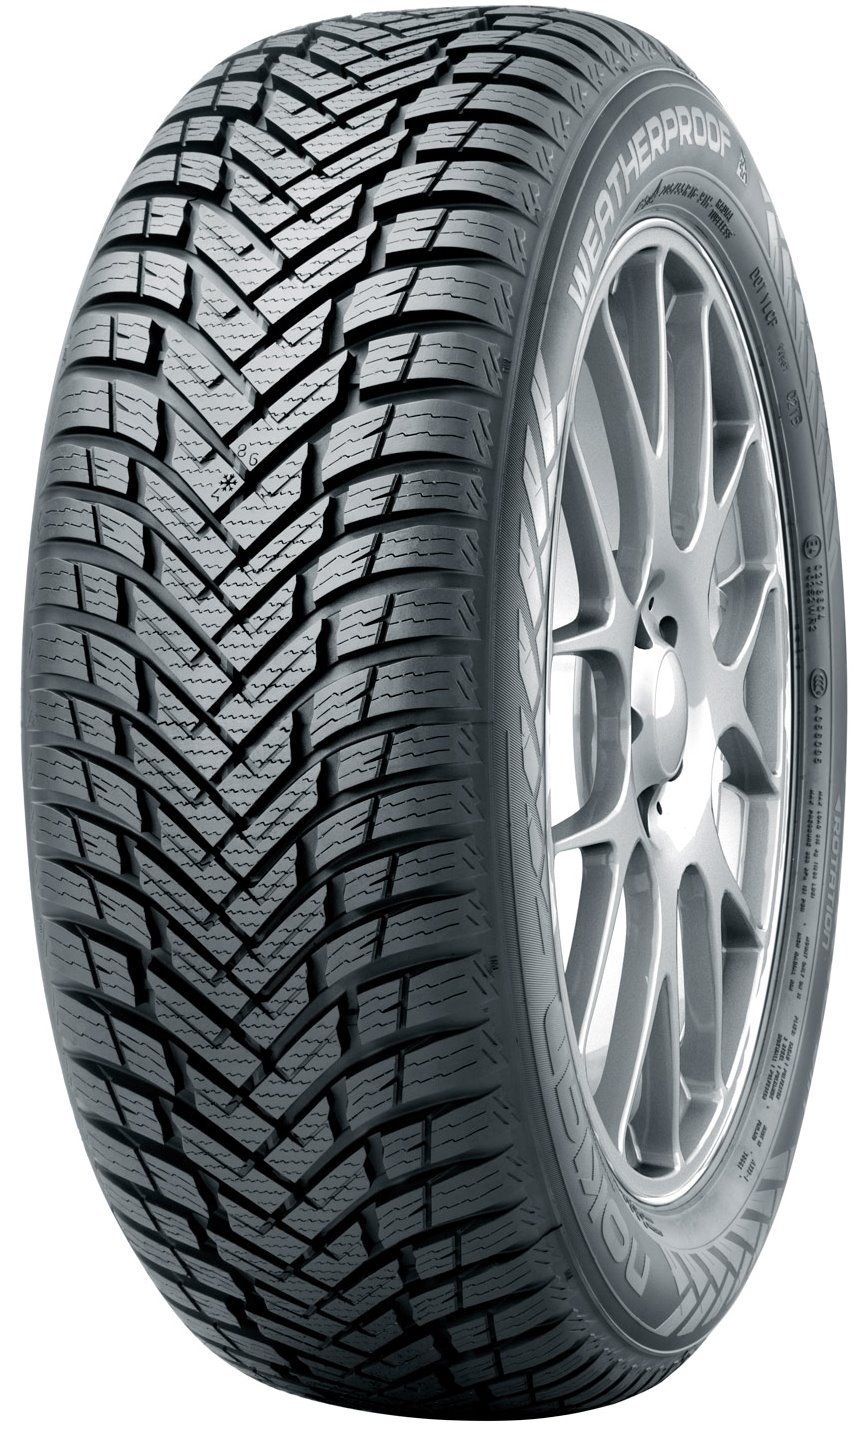 Nokian - Tyre WeatherProof Reviews Tests and